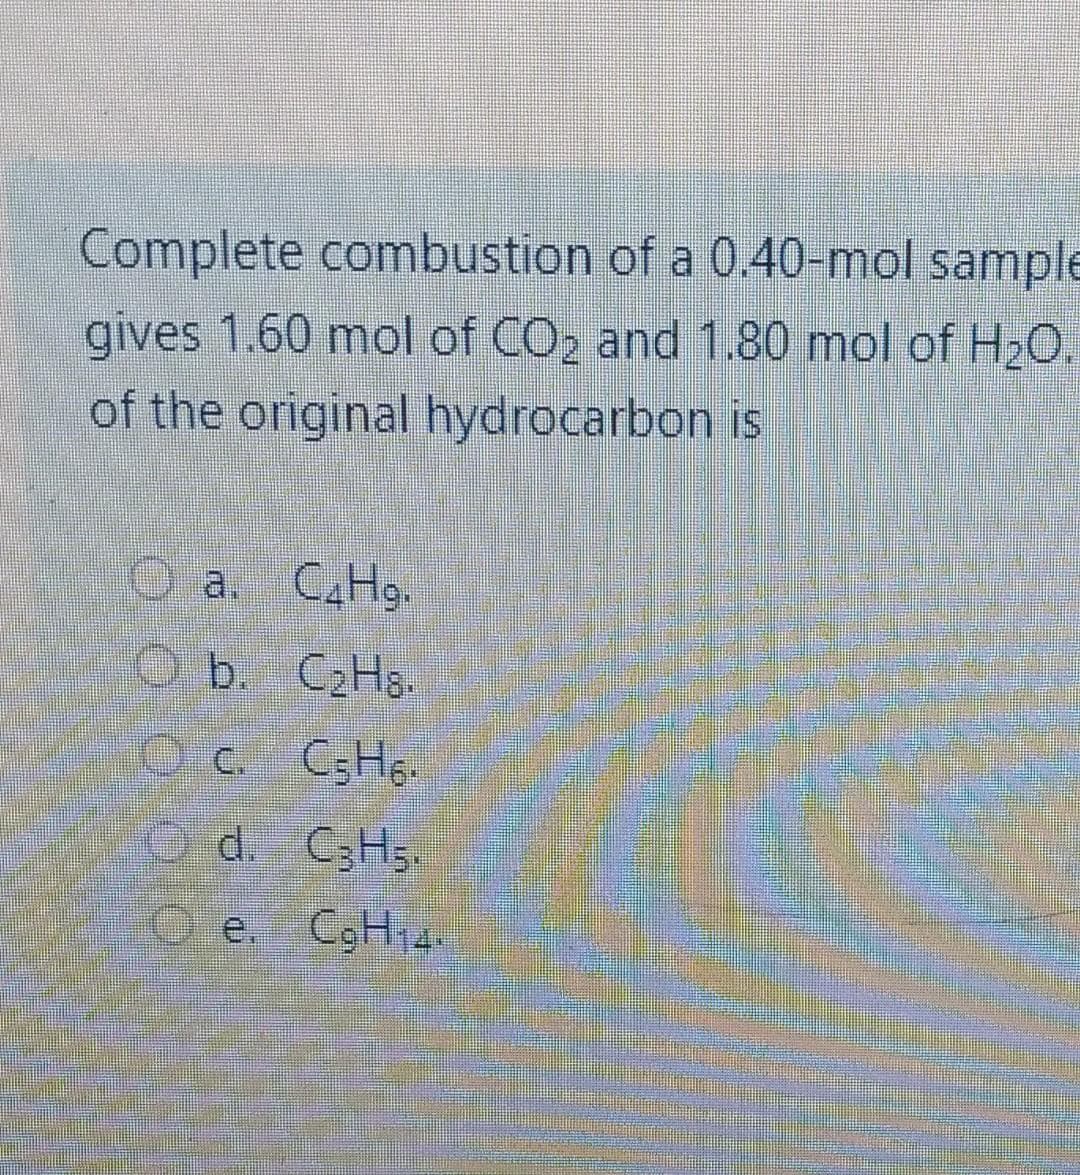 Complete combustion of a 0.40-mol sample
gives 1.60 mol of CO2 and 1.80 mol of H2O.
of the original hydrocarbon is
A O a. CAH9.
O b. C2HS.
O c.
d. C3H5.
Oe,
e. CgH,4.
